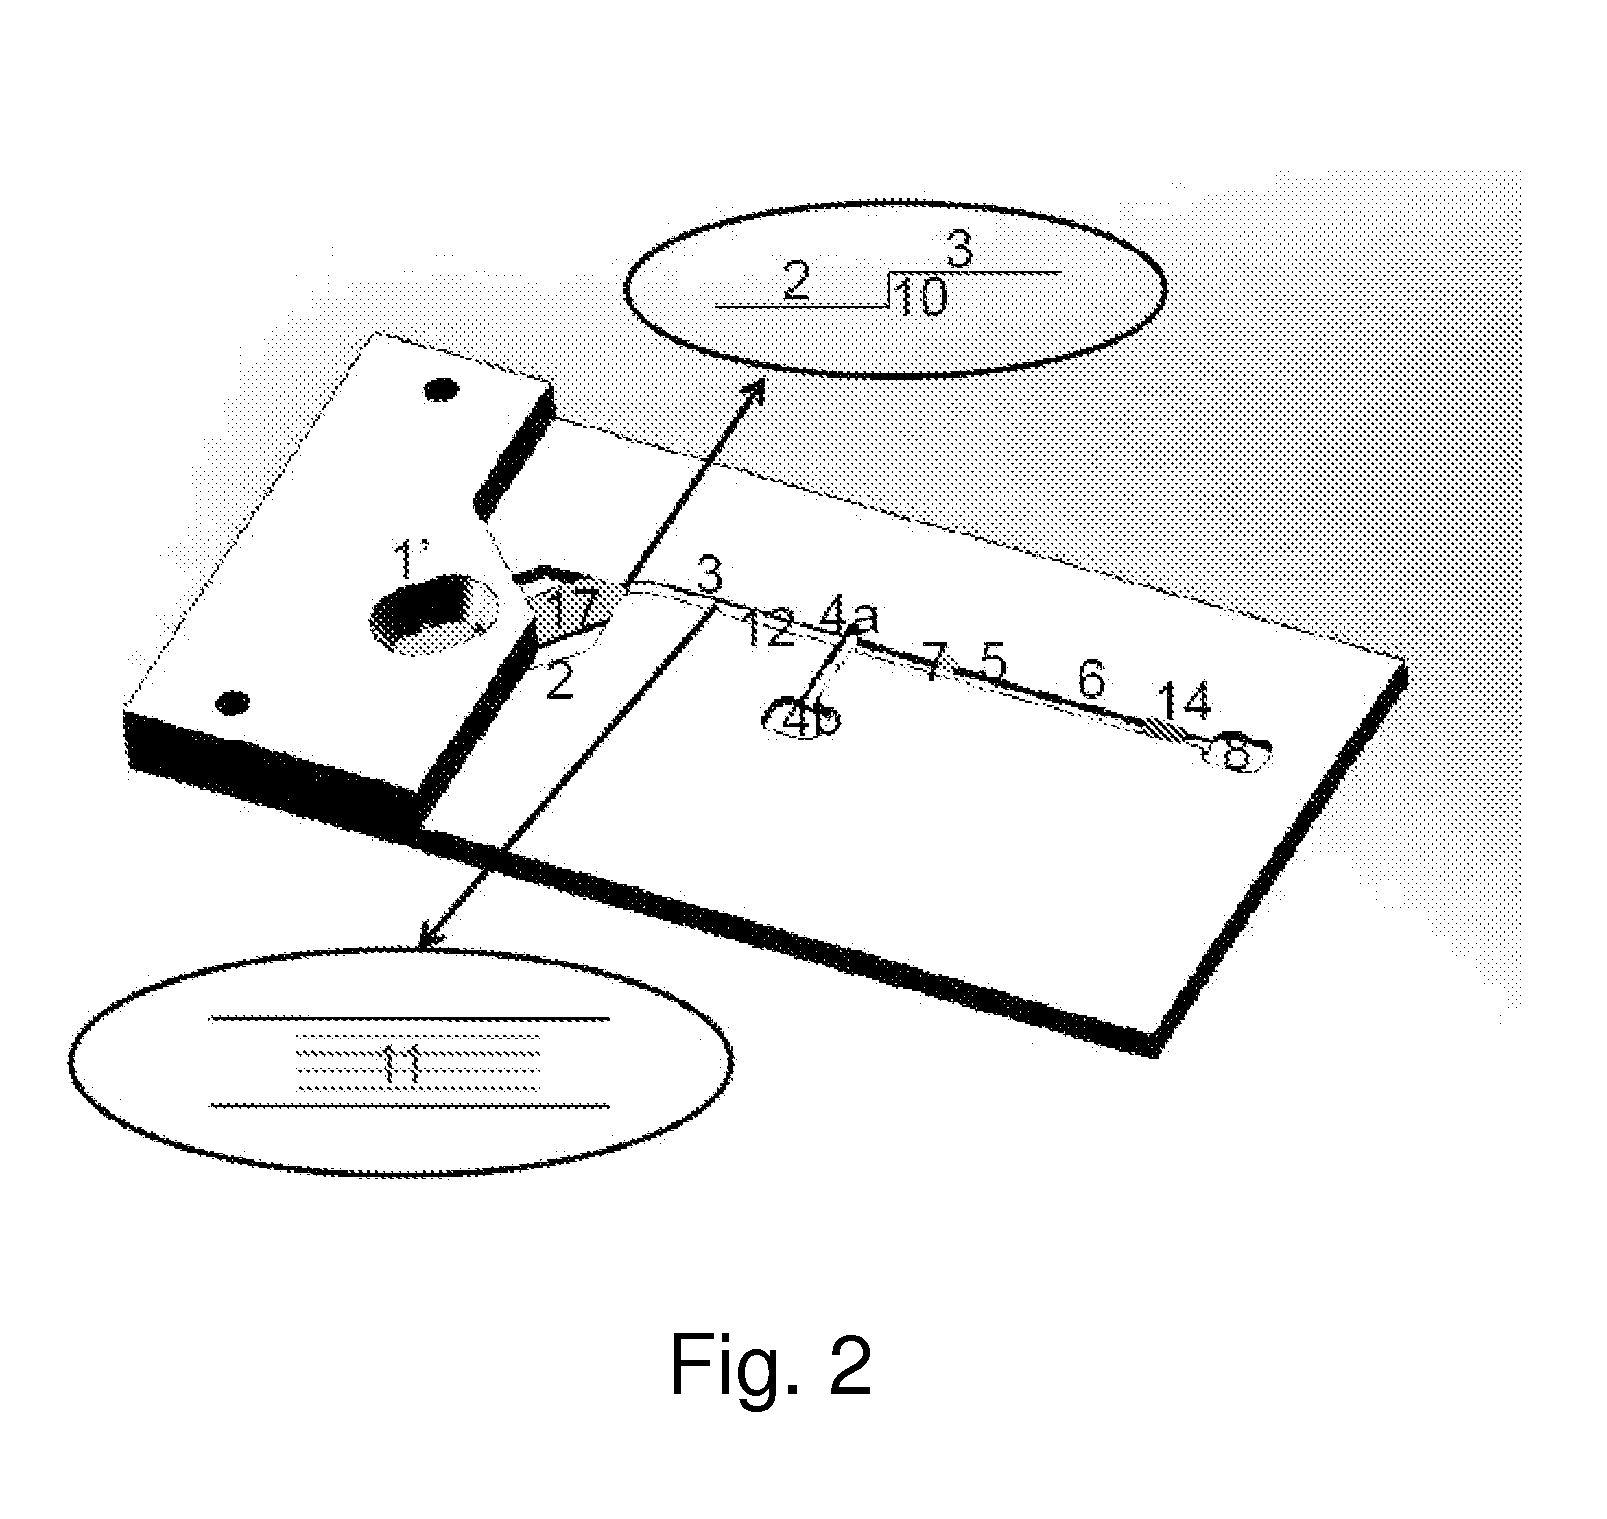 Integrated separation and detection cartridge with means and method for increasing signal to noise ratio